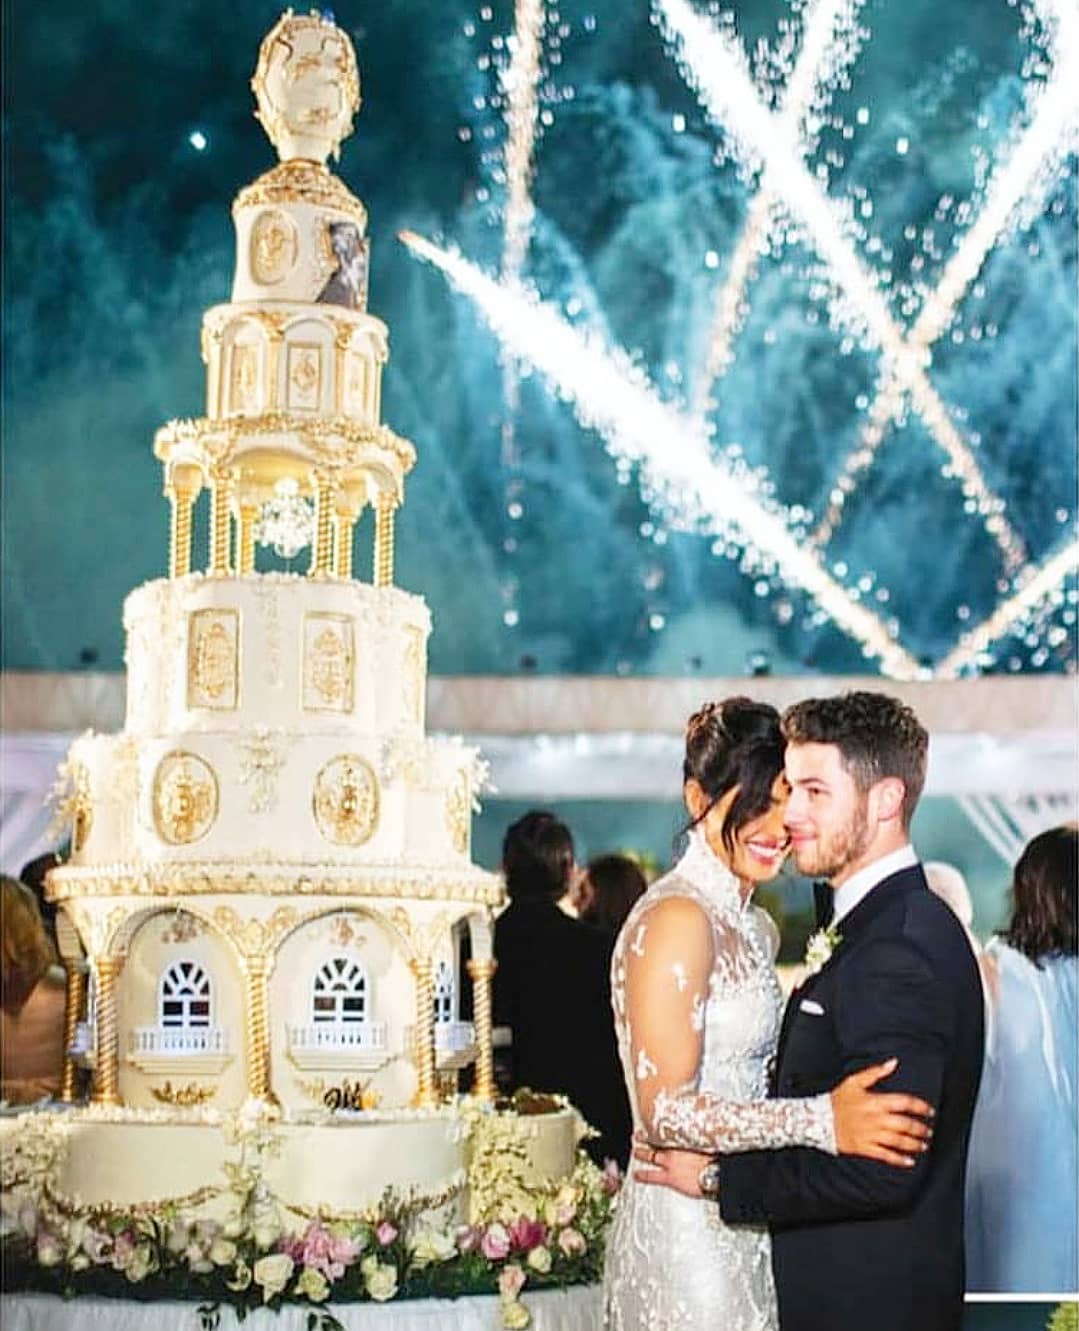 Behold world's most expensive cake worth N35bn - New Telegraph